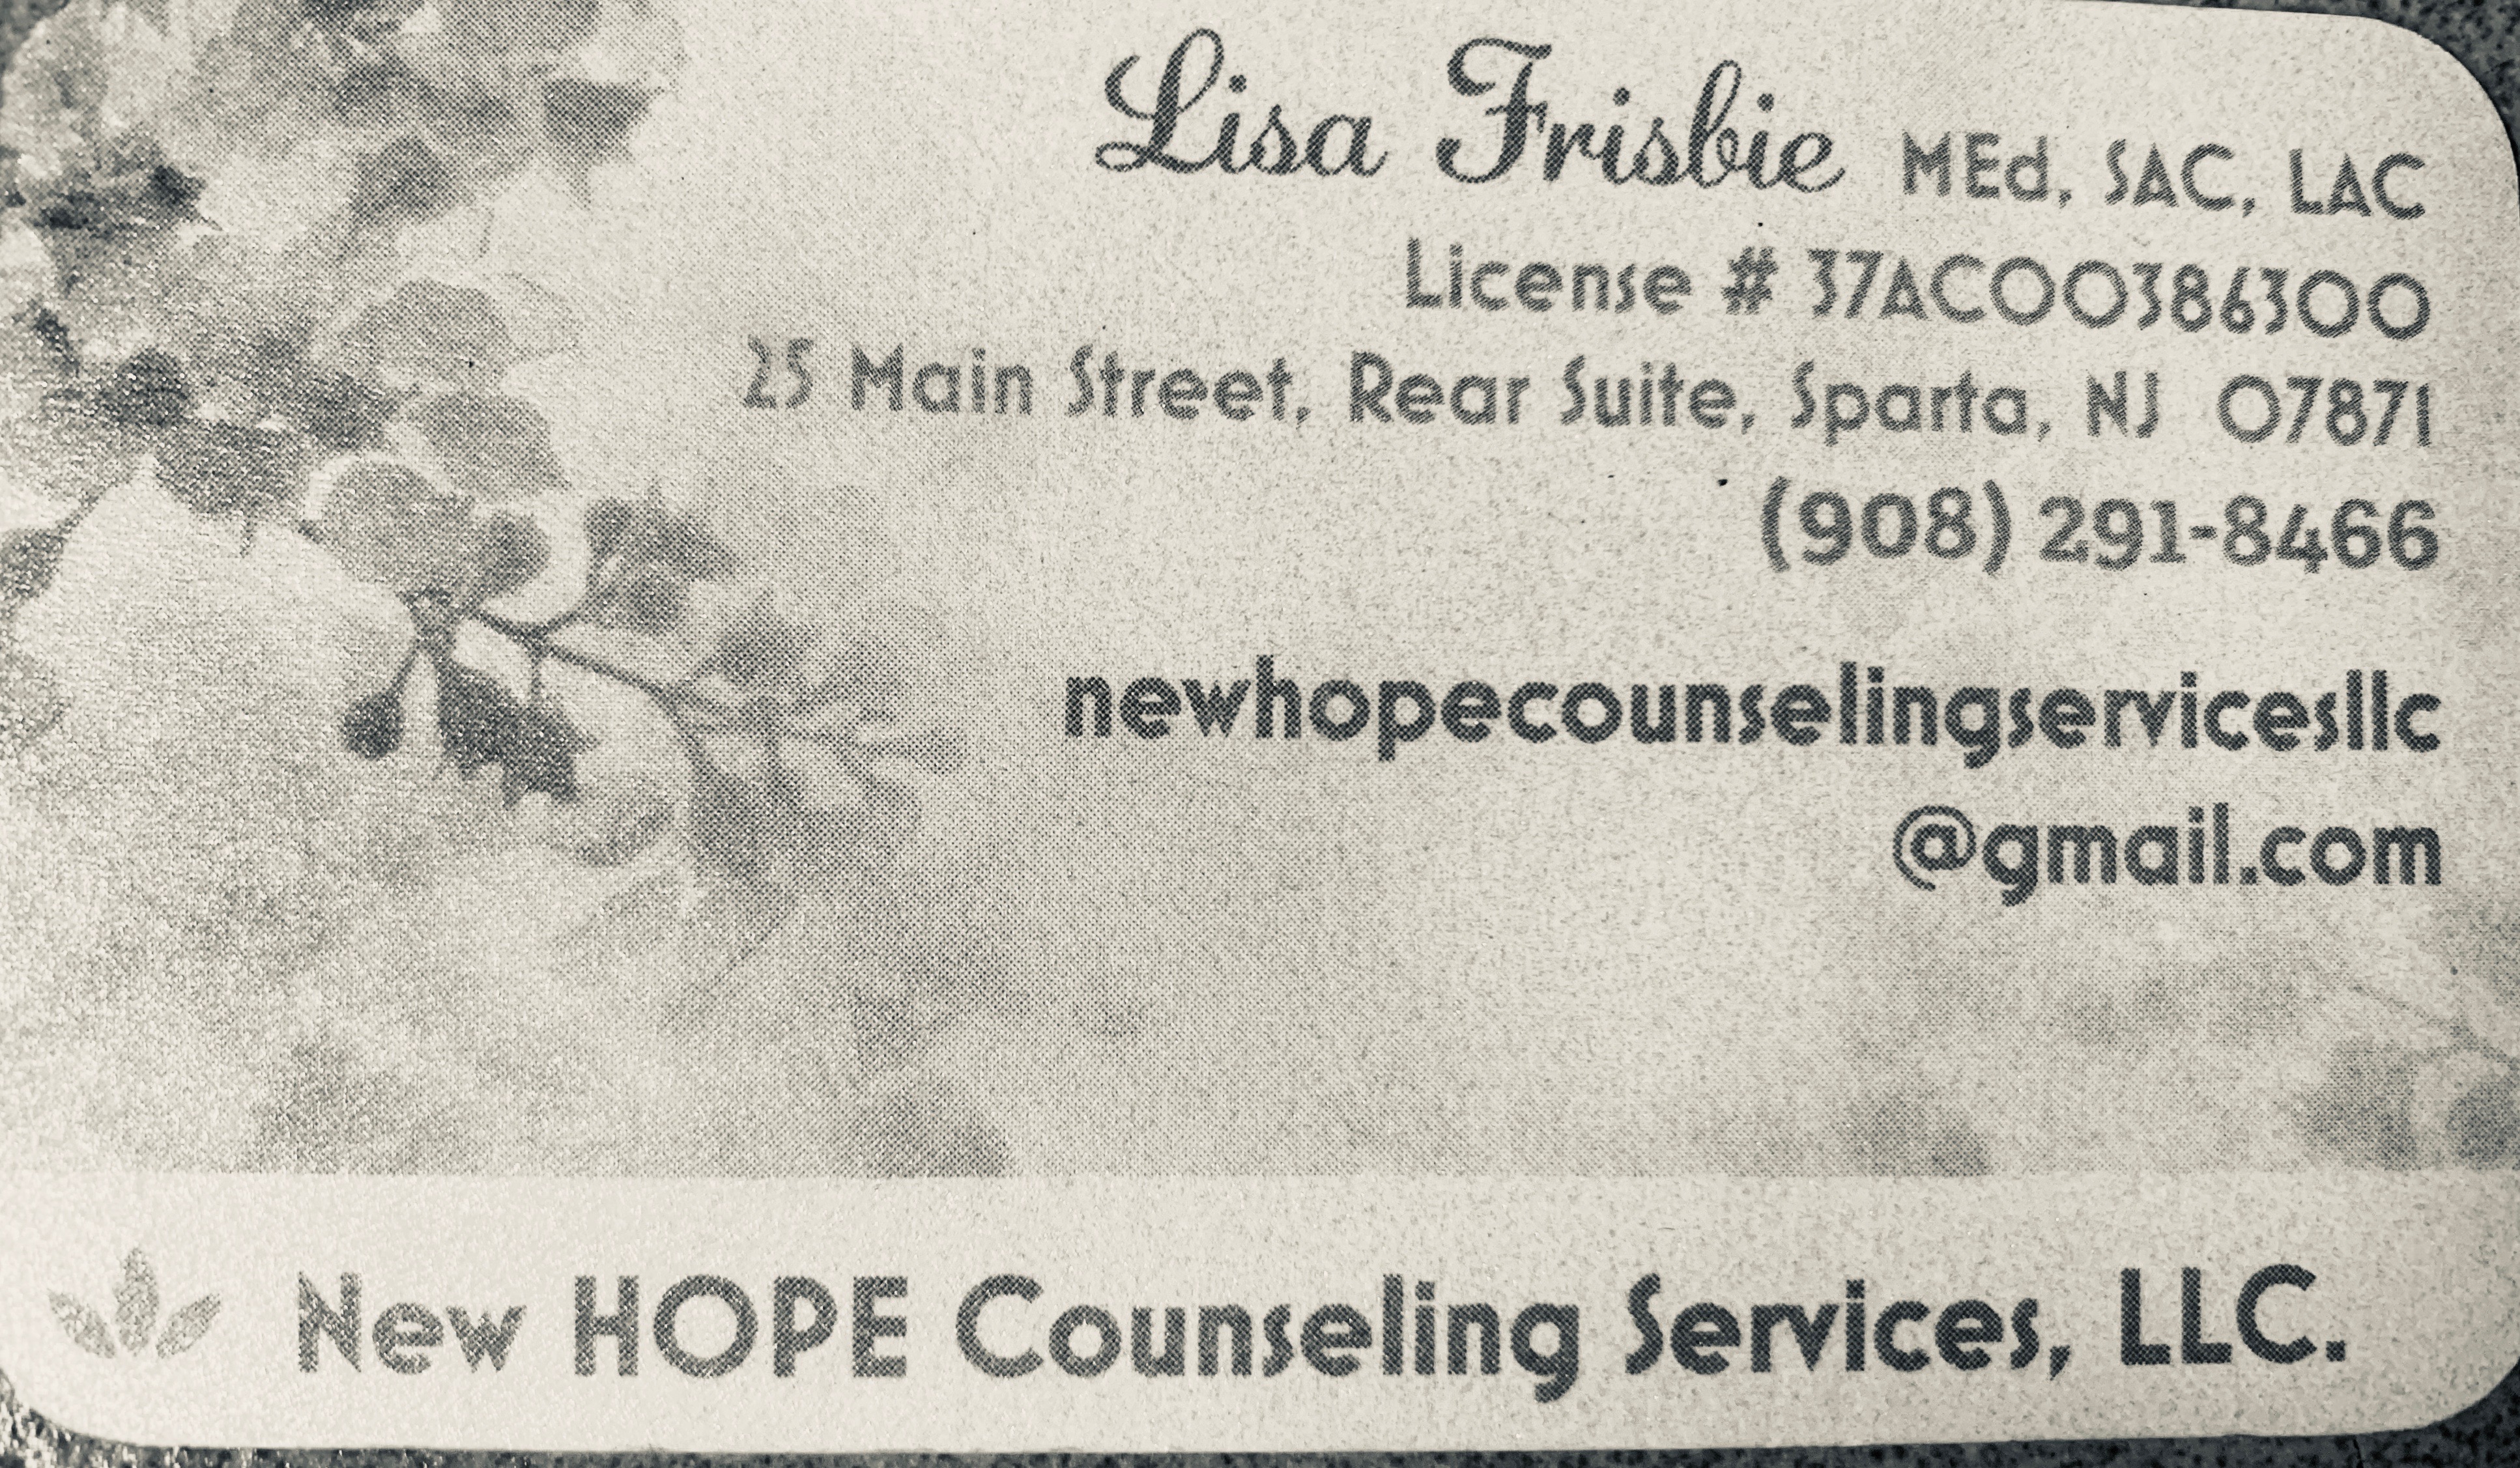 New Hope Counseling Services, LLC